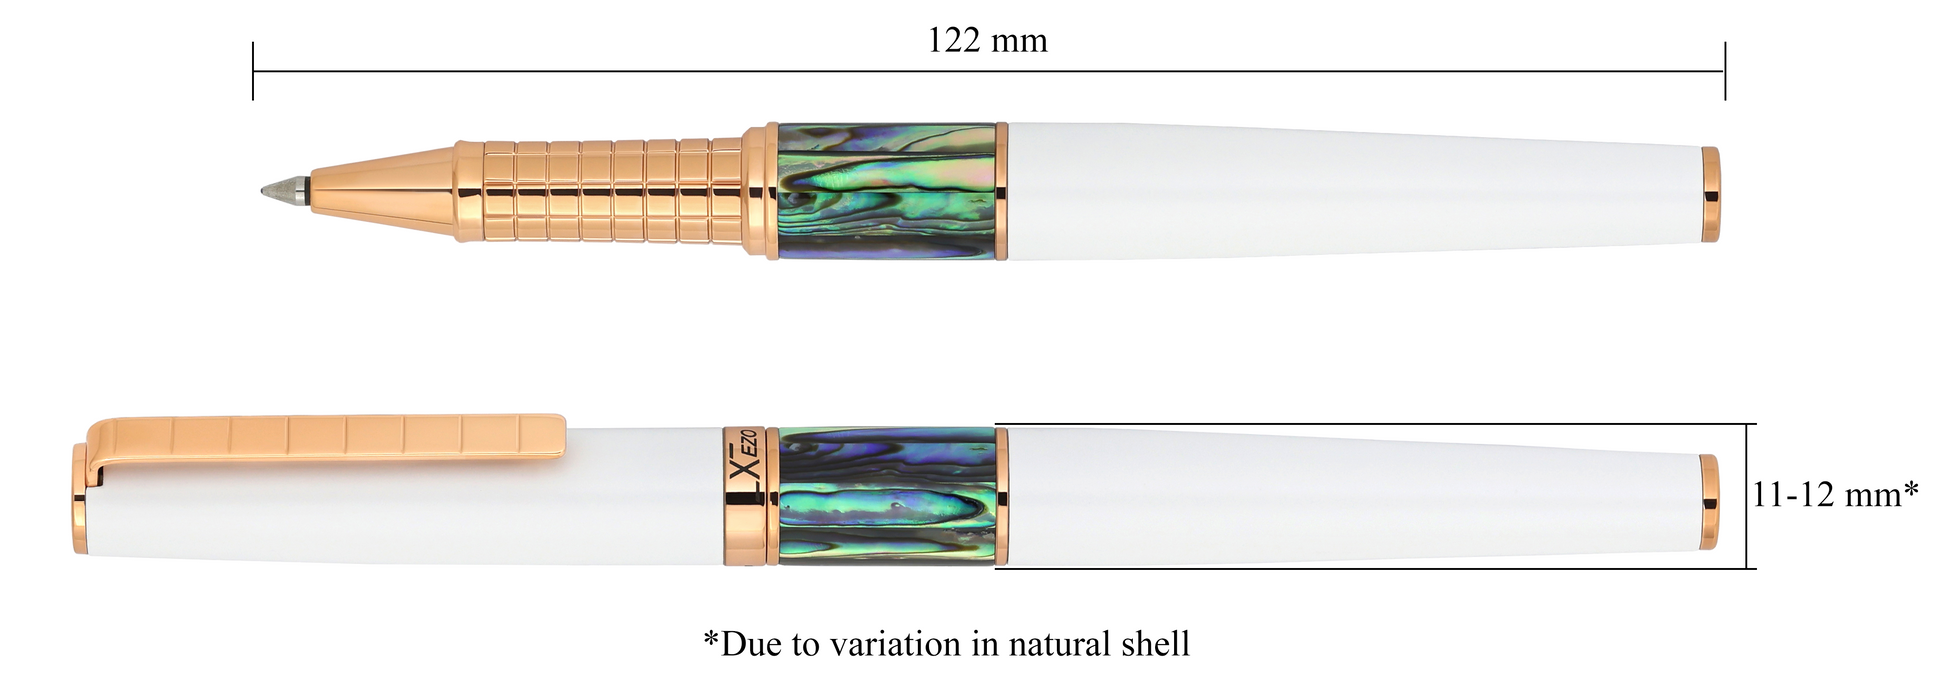 Xezo - Vertical view of two Speed Master White R-ARG Rollerball pens; the one on the left is capped, and the one on the right is uncapped; Length is labeled 122 mm, width is labeled 11-12mm (Due to variation in natural shell)